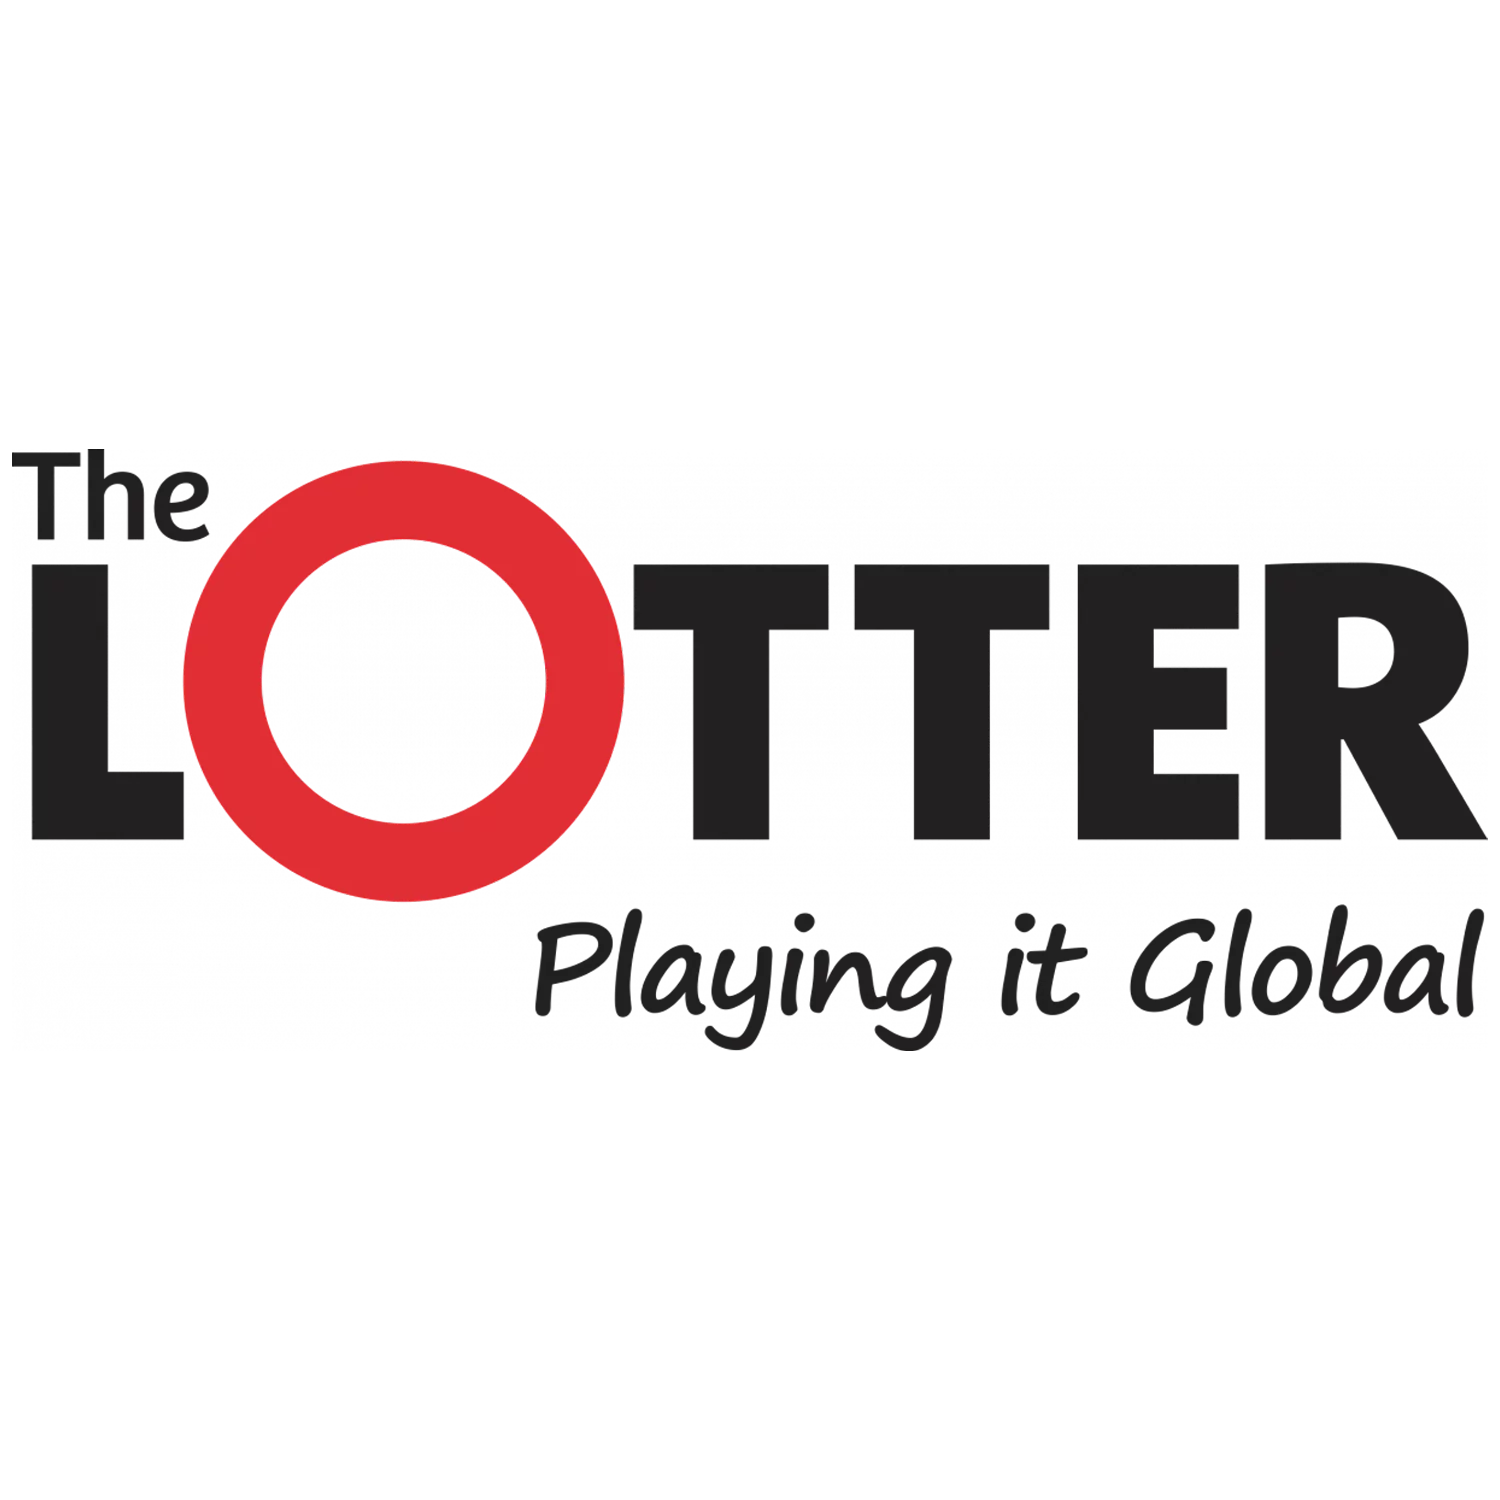 Learn what lotteries you can buy on TheLotter and how to do it.